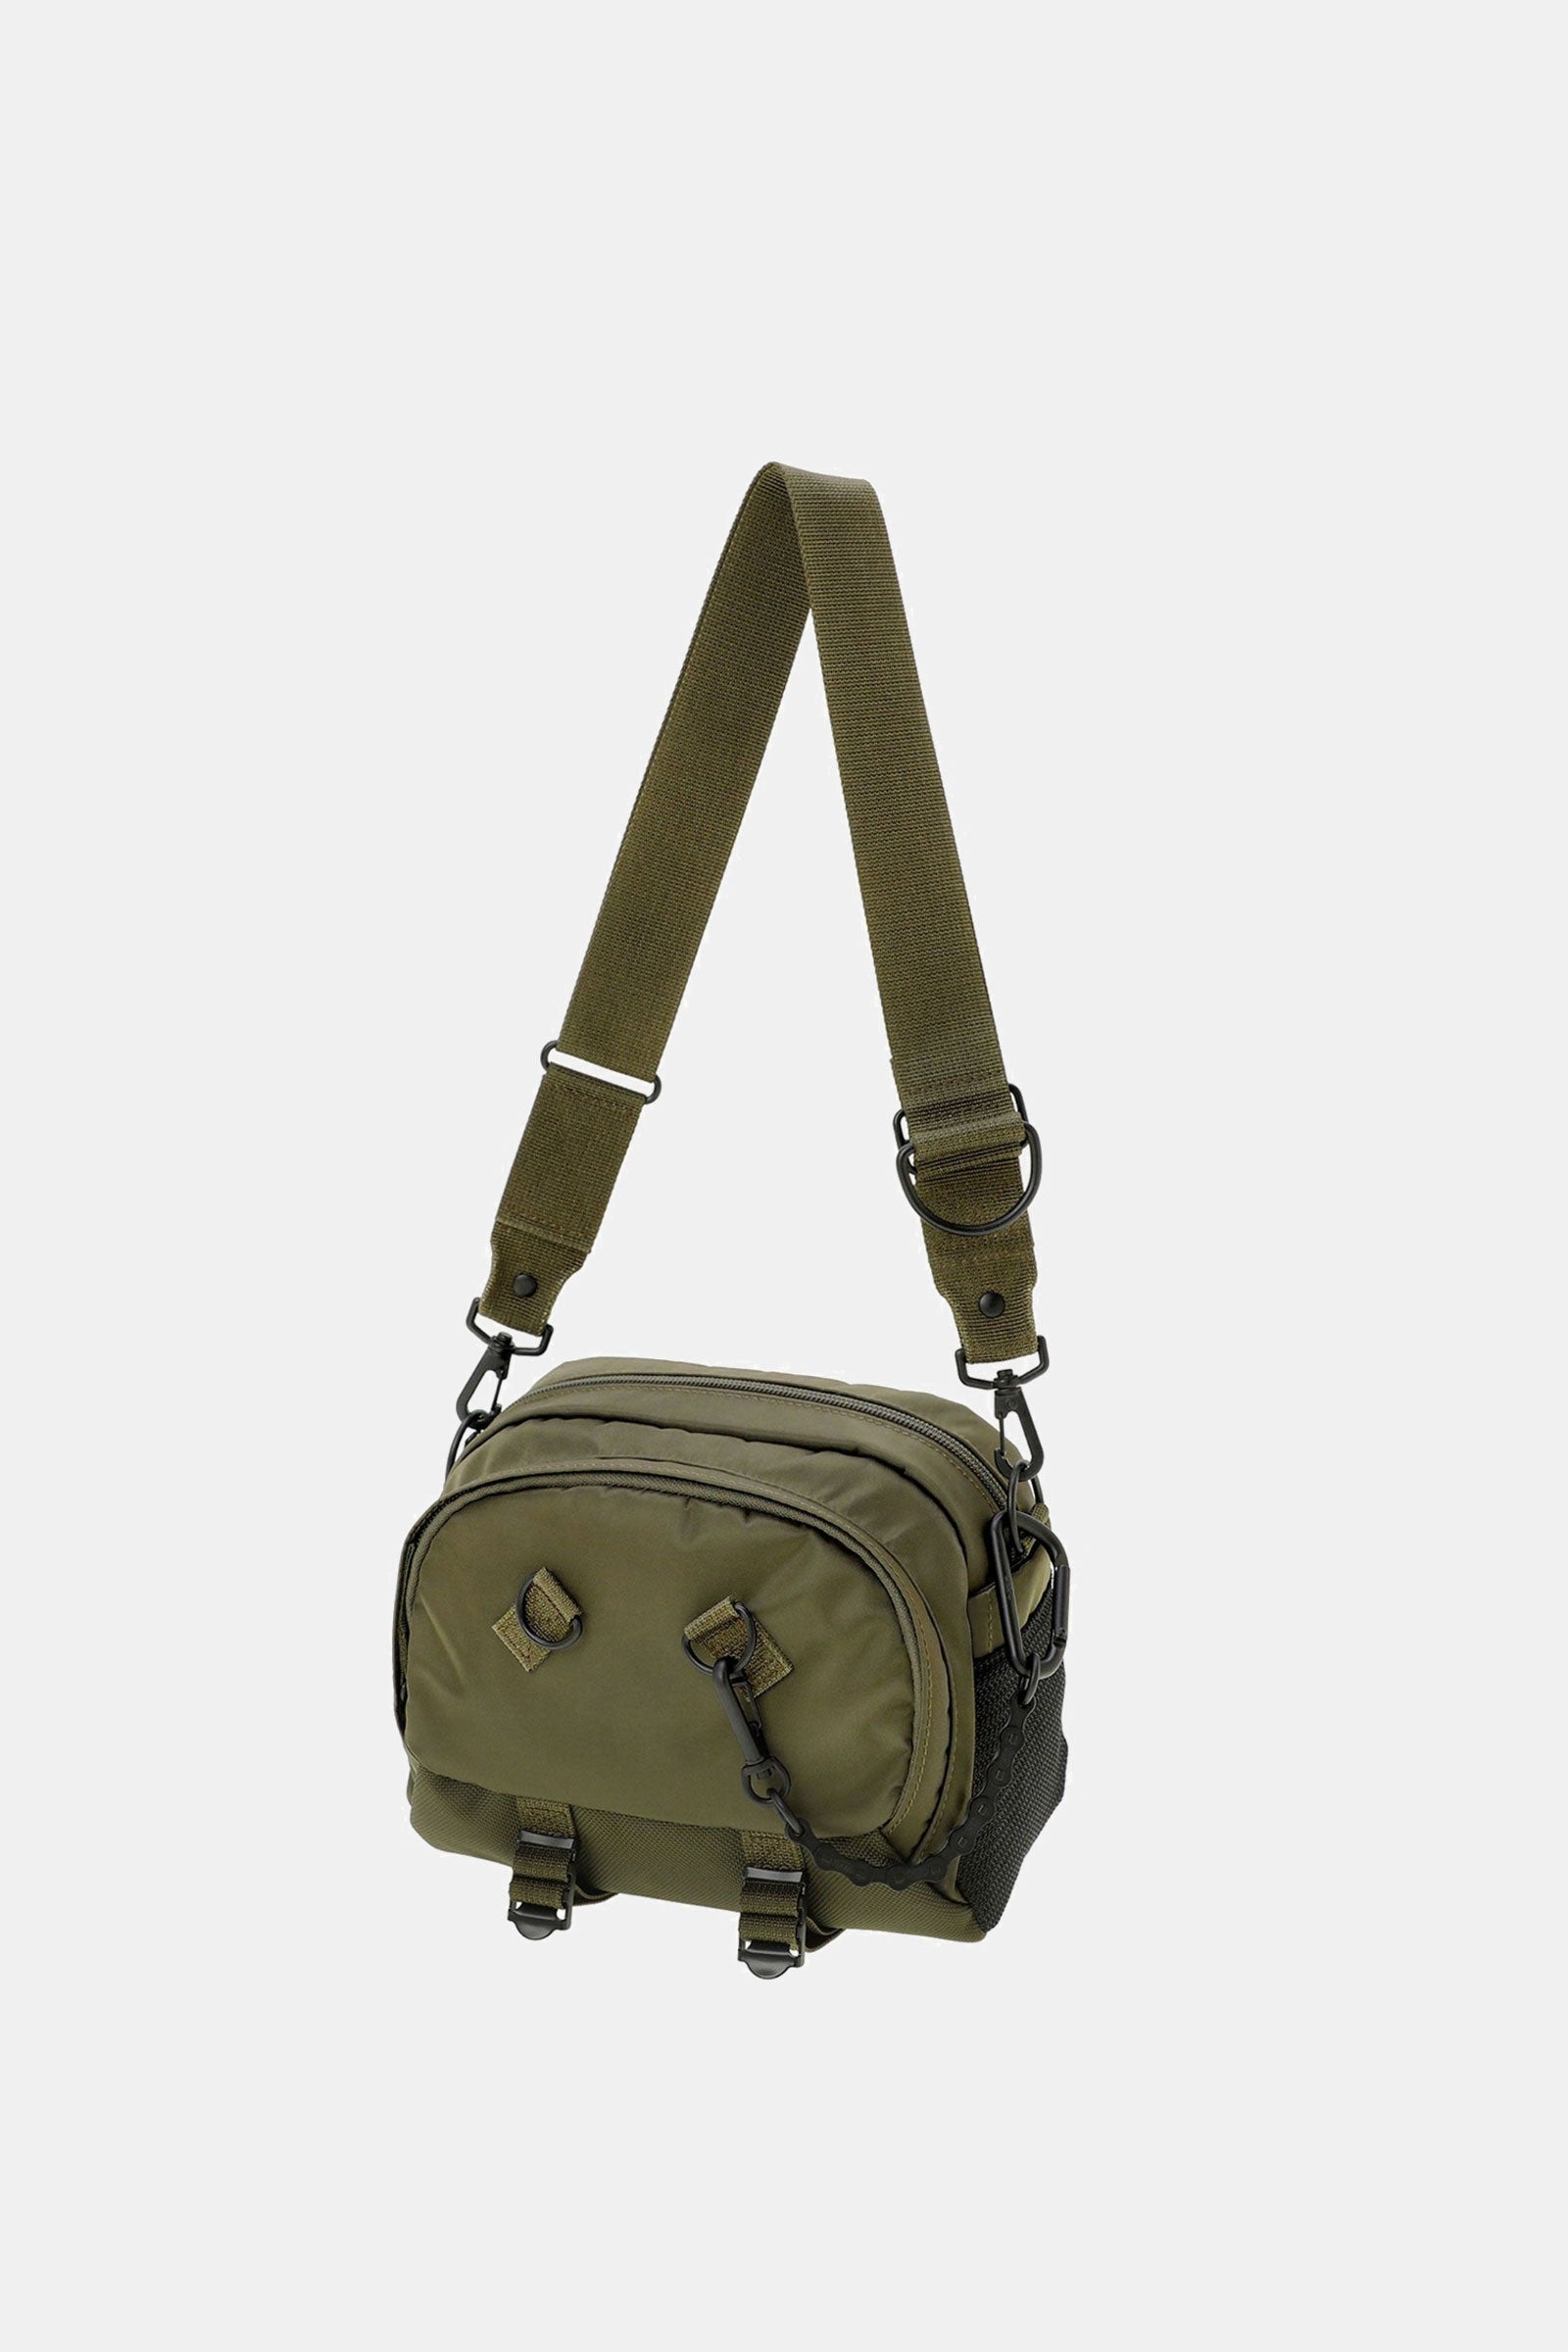 POTR Ride Shoulder Bag with Bicycle Chain